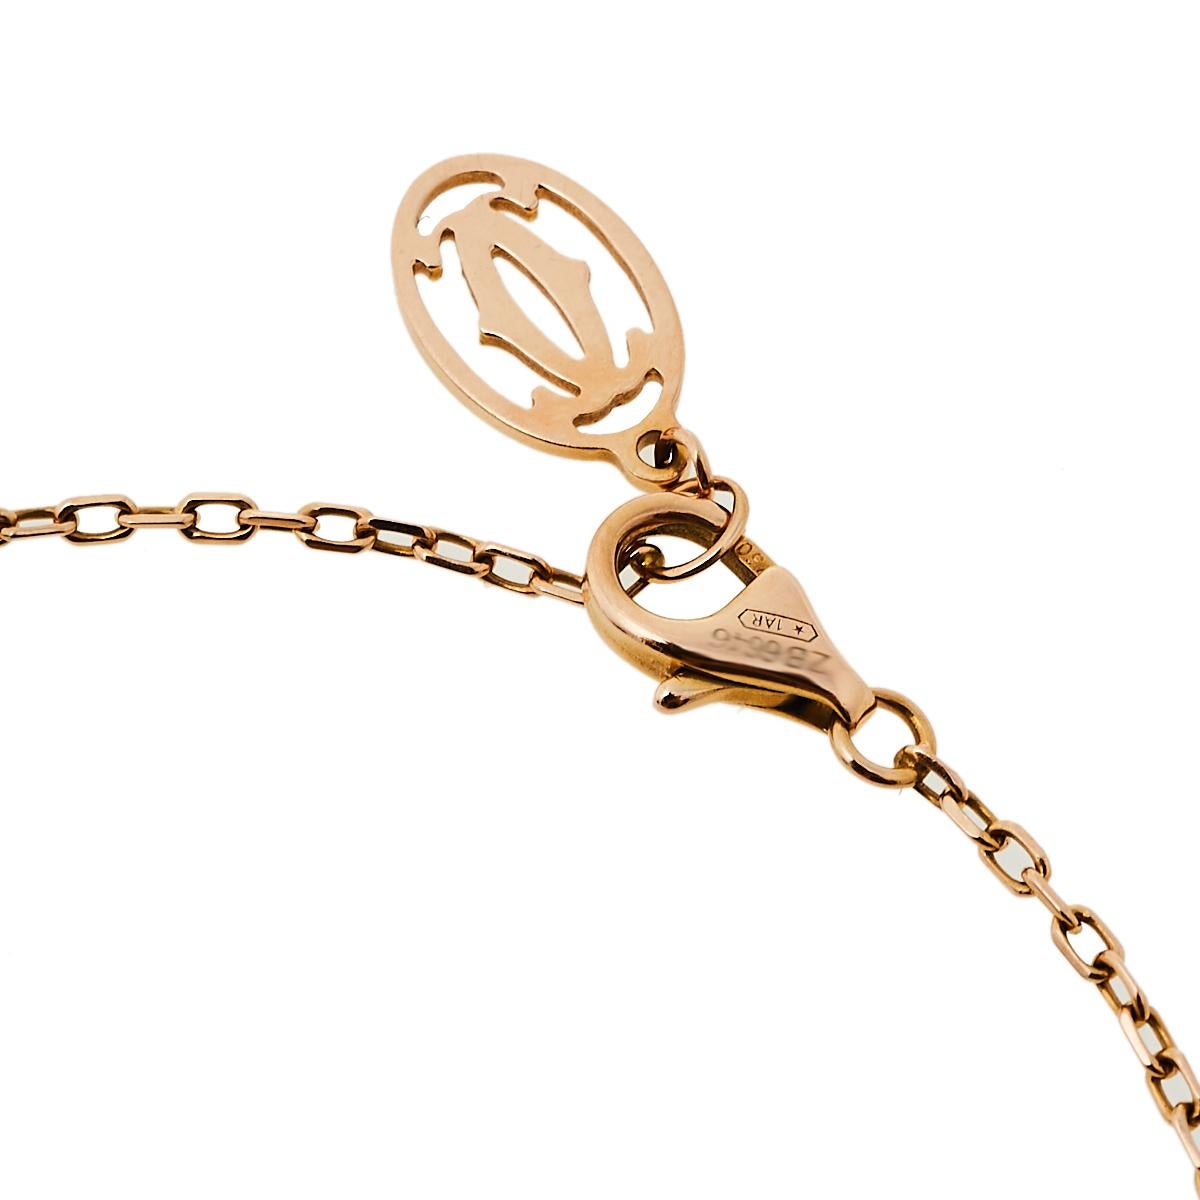 Simple is the new elegant and this bracelet from Cartier is a clear example of the same. Cartier 18k rose gold chain bracelet is centered with a diamond and finished with an adjustable lobster clasp closure. This understated piece is effortlessly